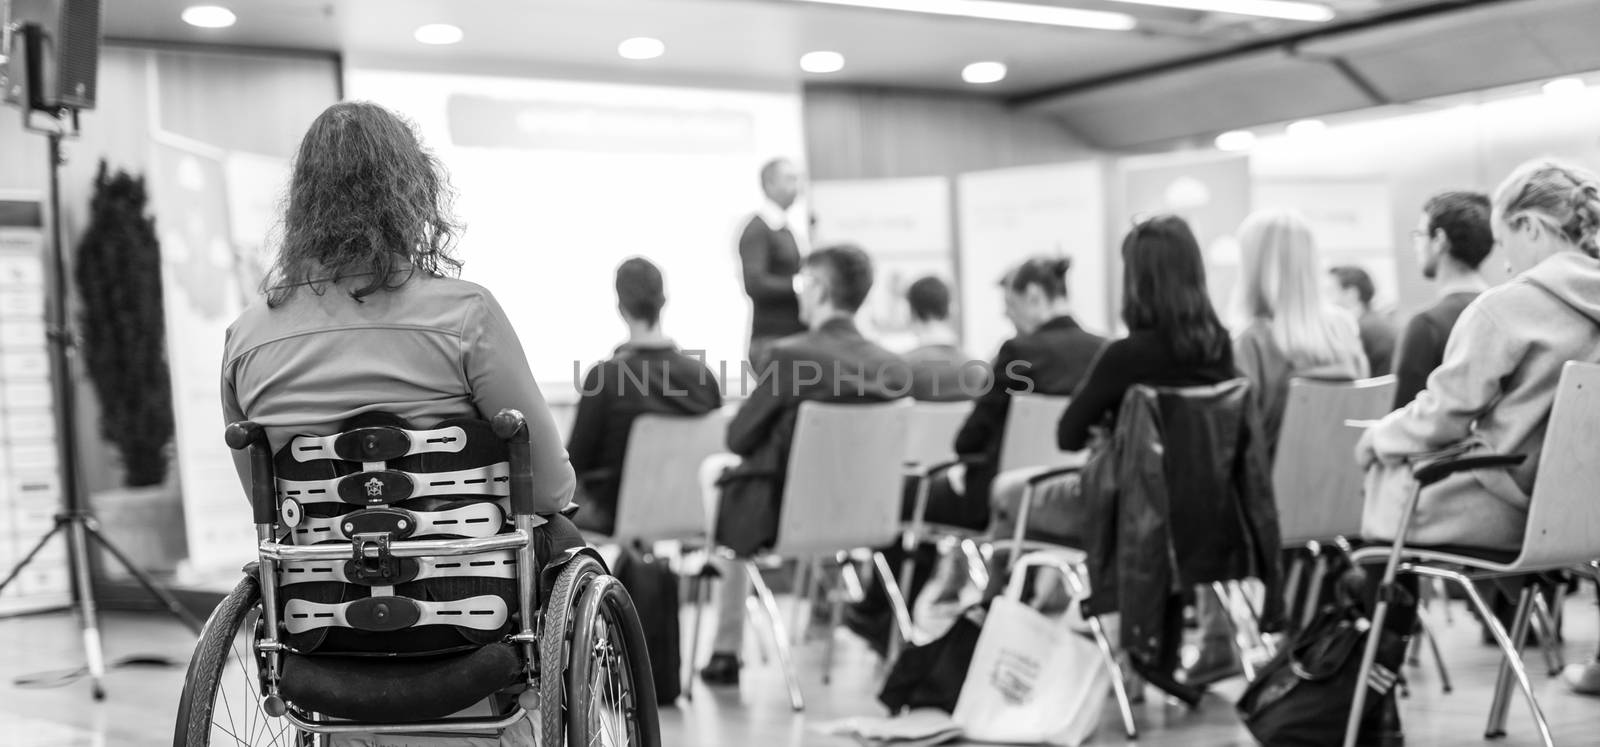 Rear view of unrecognizable woman on wheelchair participating in business conference talk. Business and entrepreneurship symposium. Black and white image.